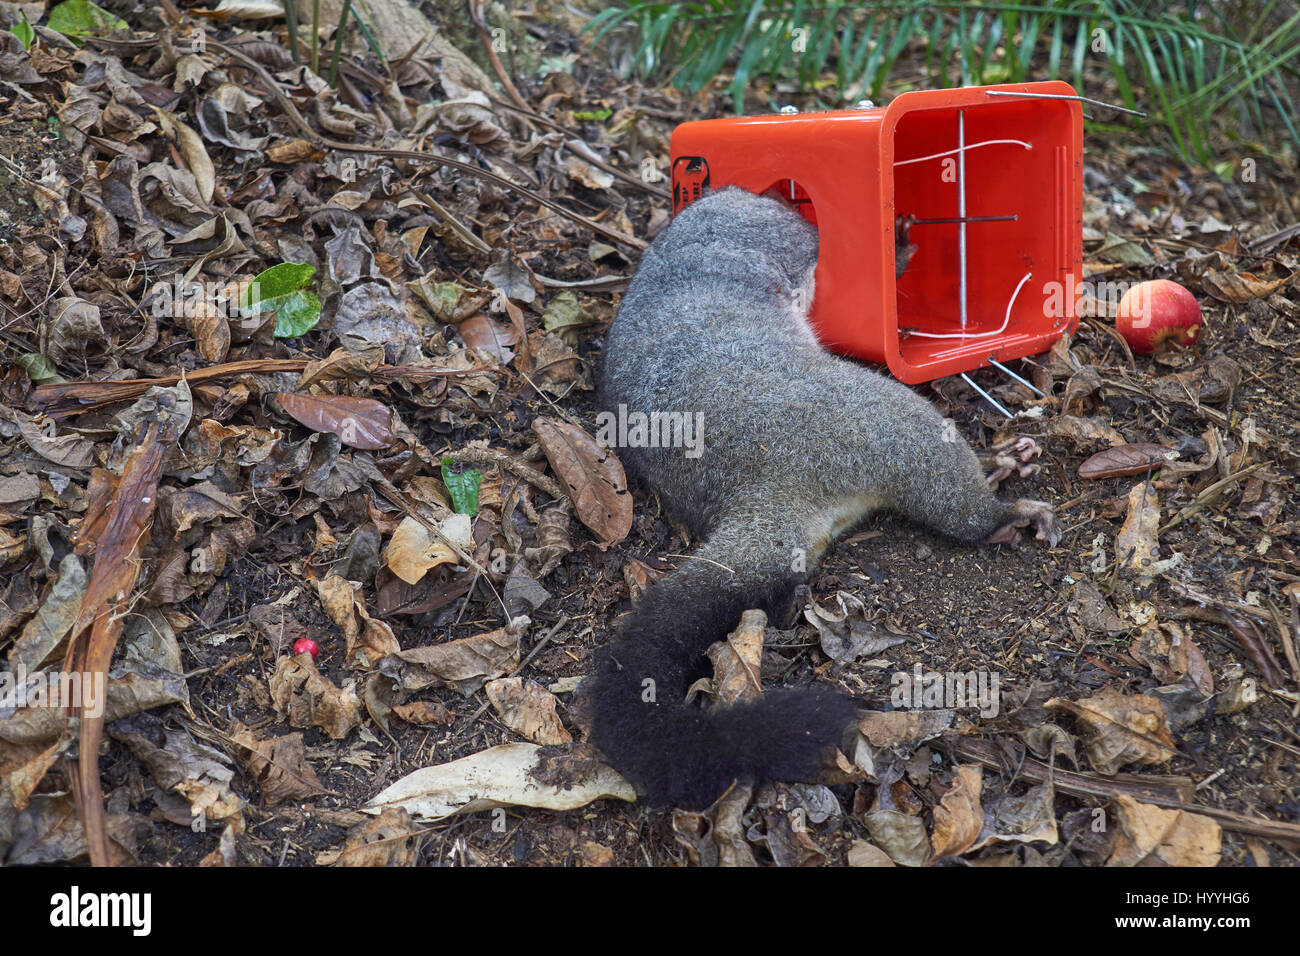 https://c8.alamy.com/comp/HYYHG6/conservation-in-new-zealand-dead-brushtail-possum-in-a-bush-pest-trap-HYYHG6.jpg